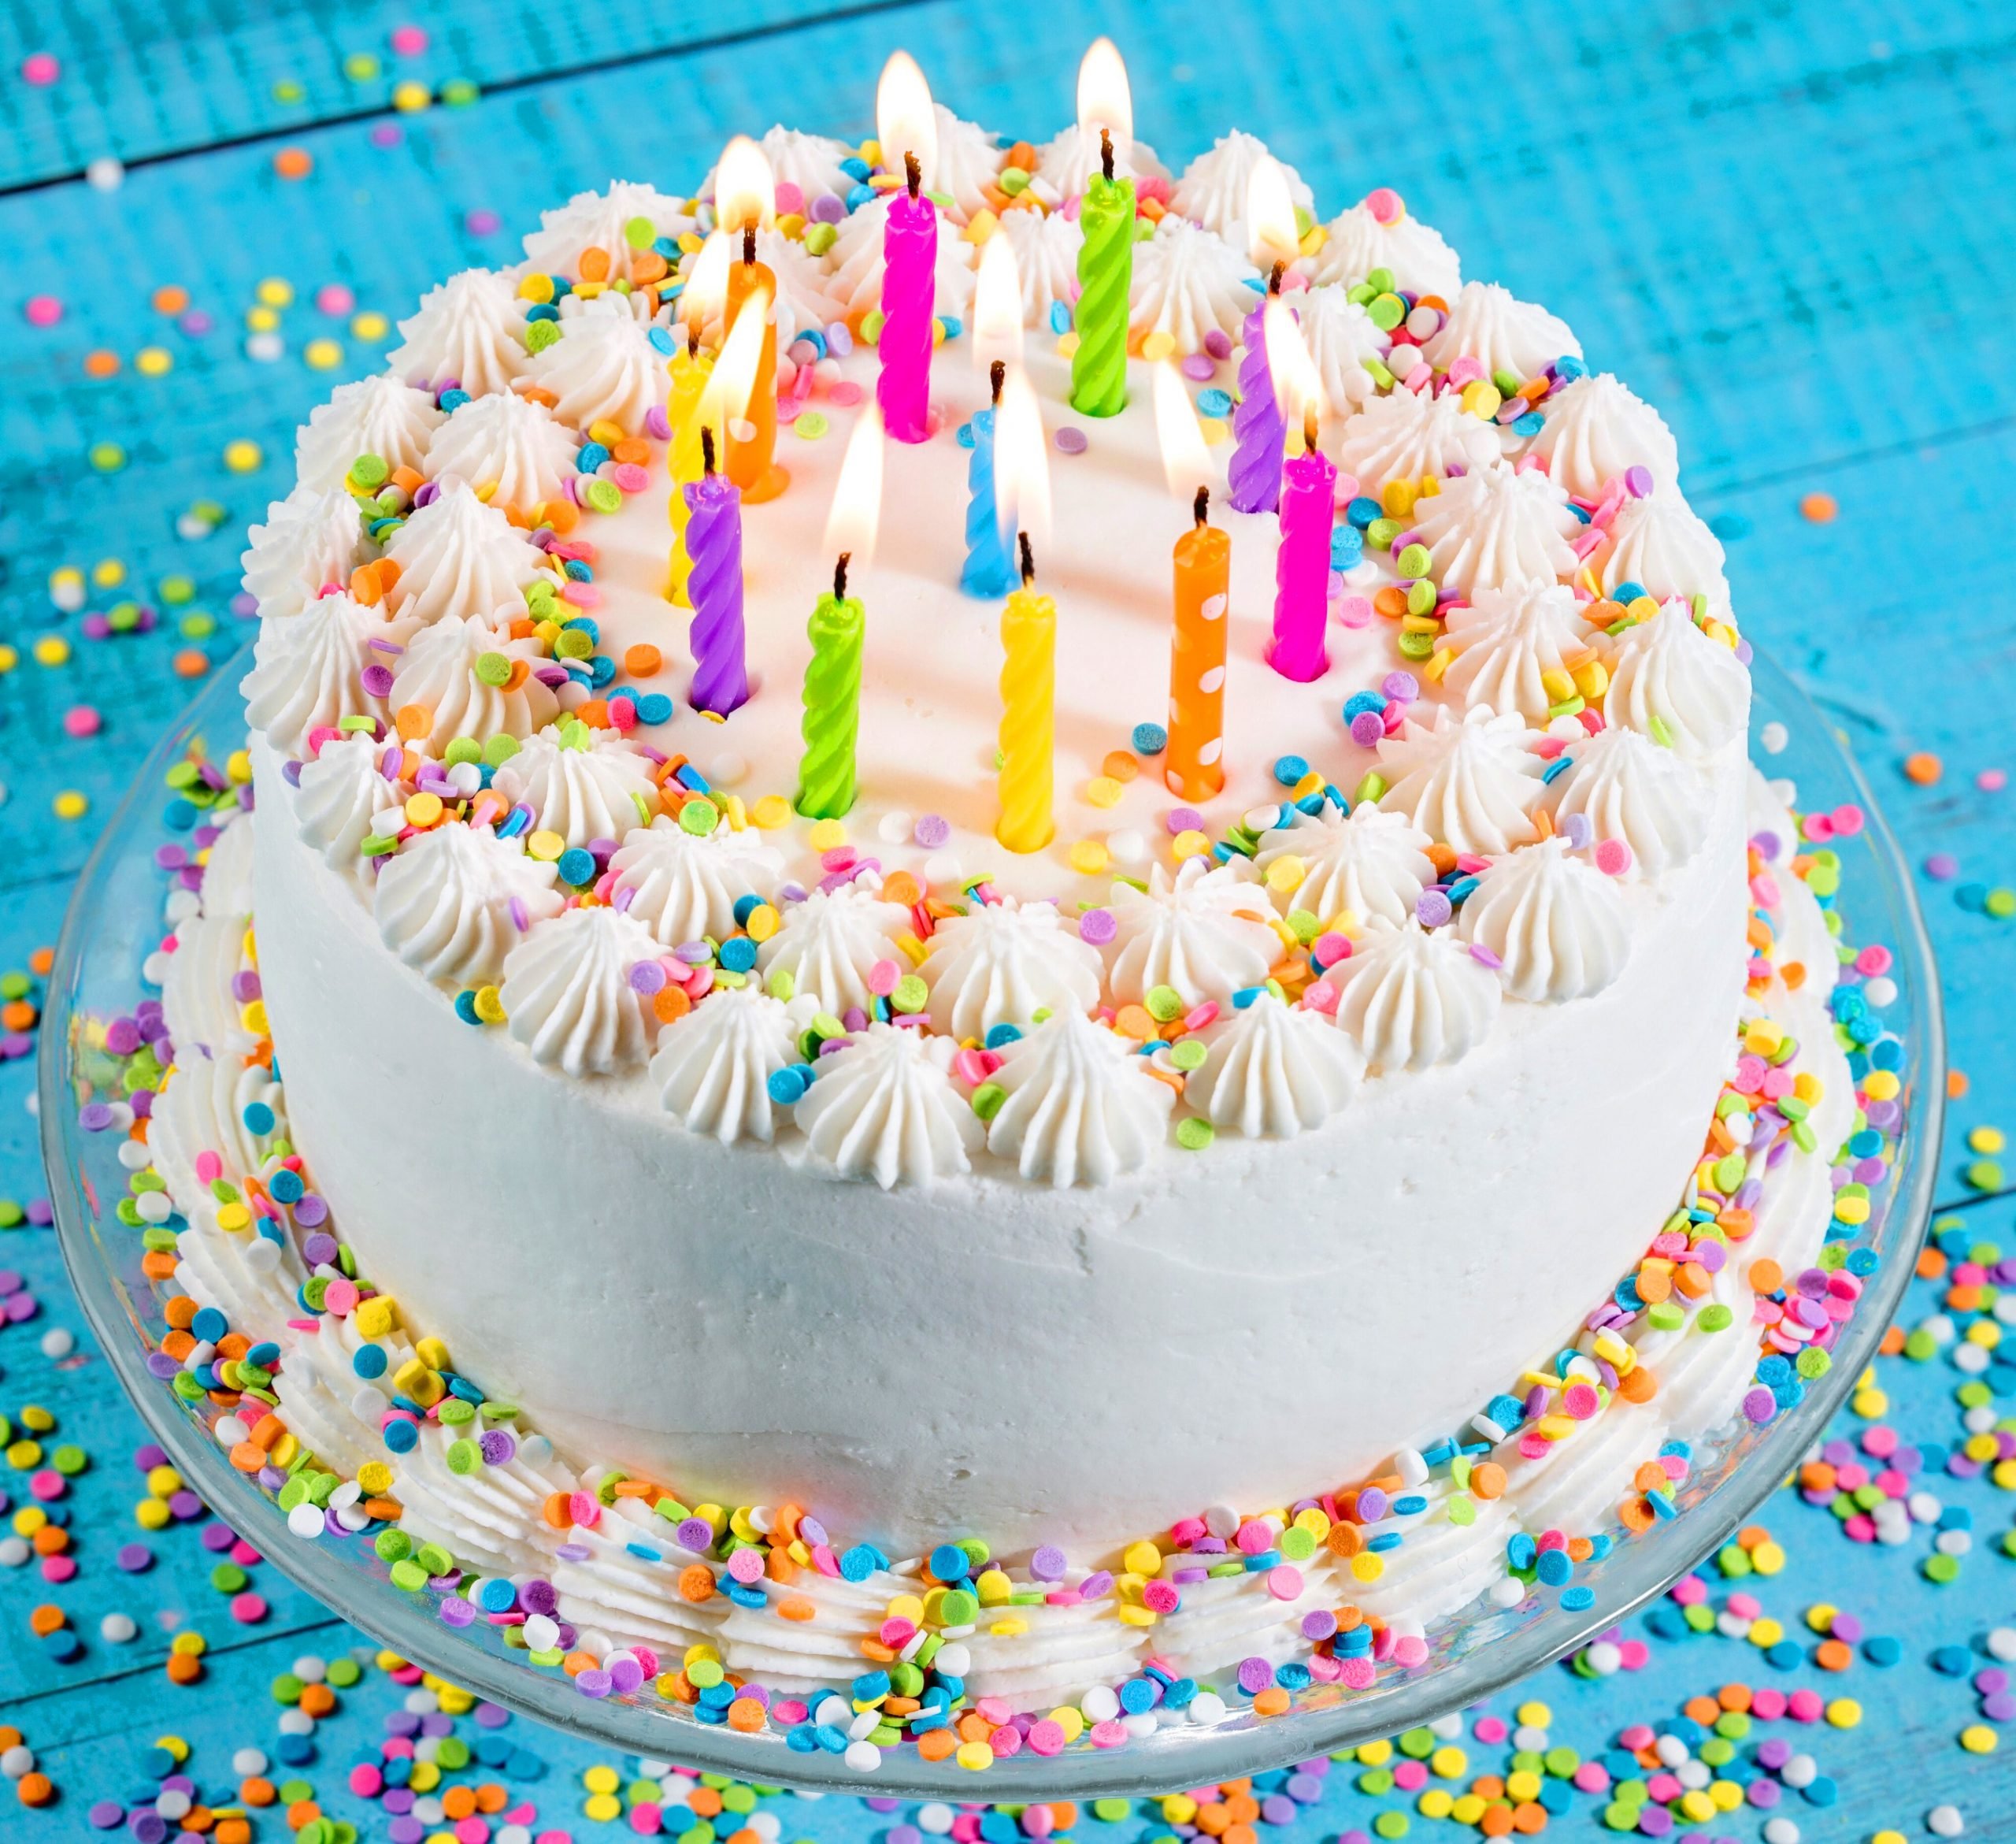 How To Start A Birthday Cake Sg Delivery Business Through An Online Mode